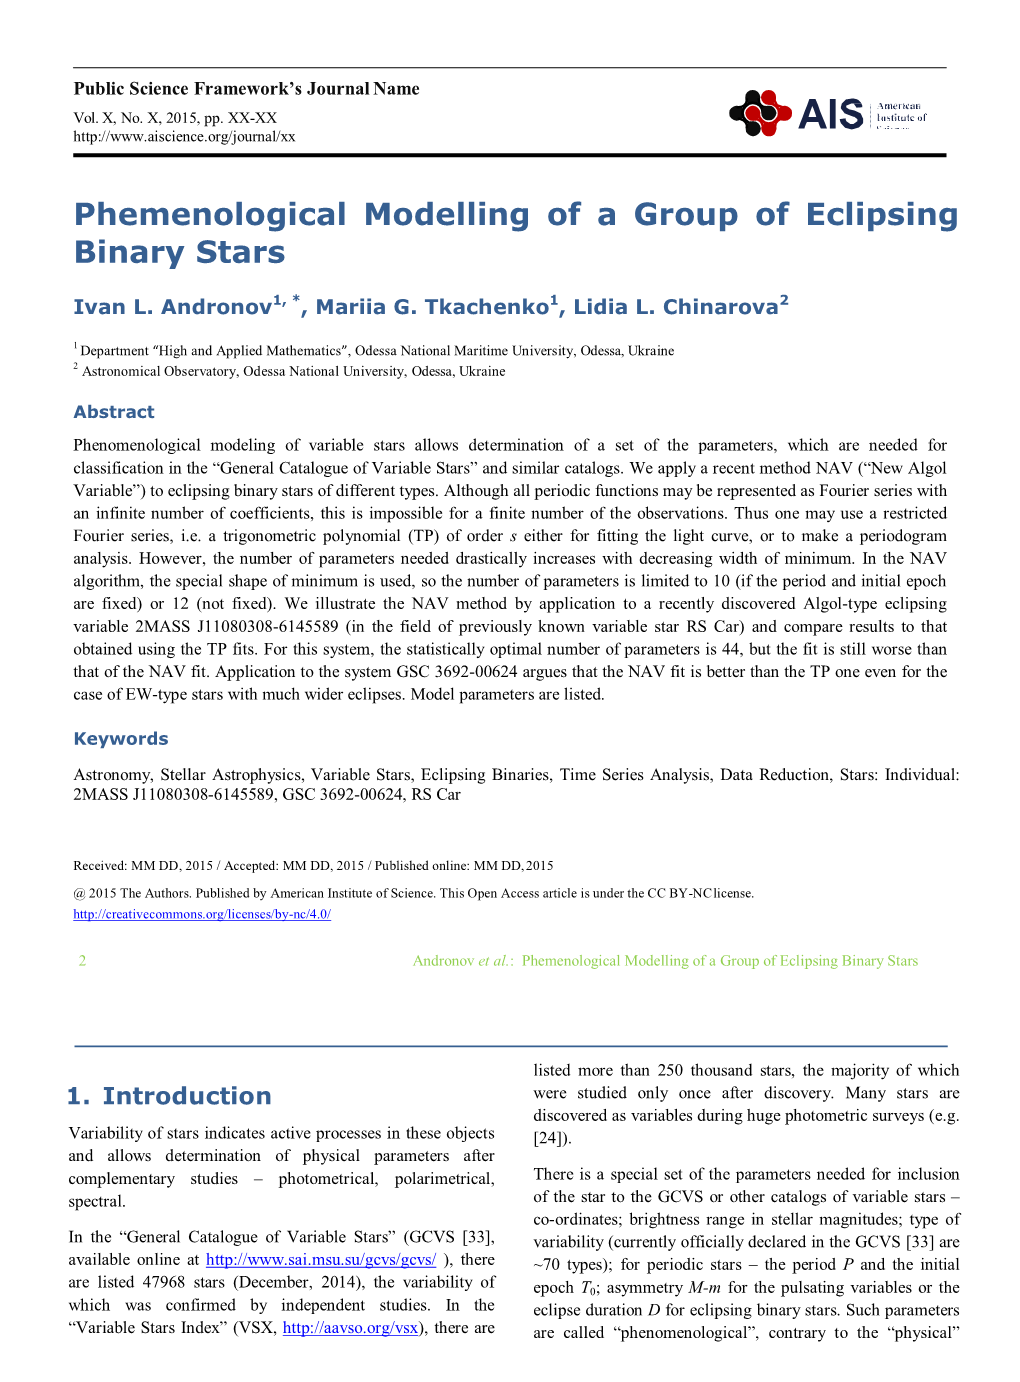 Phemenological Modelling of a Group of Eclipsing Binary Stars